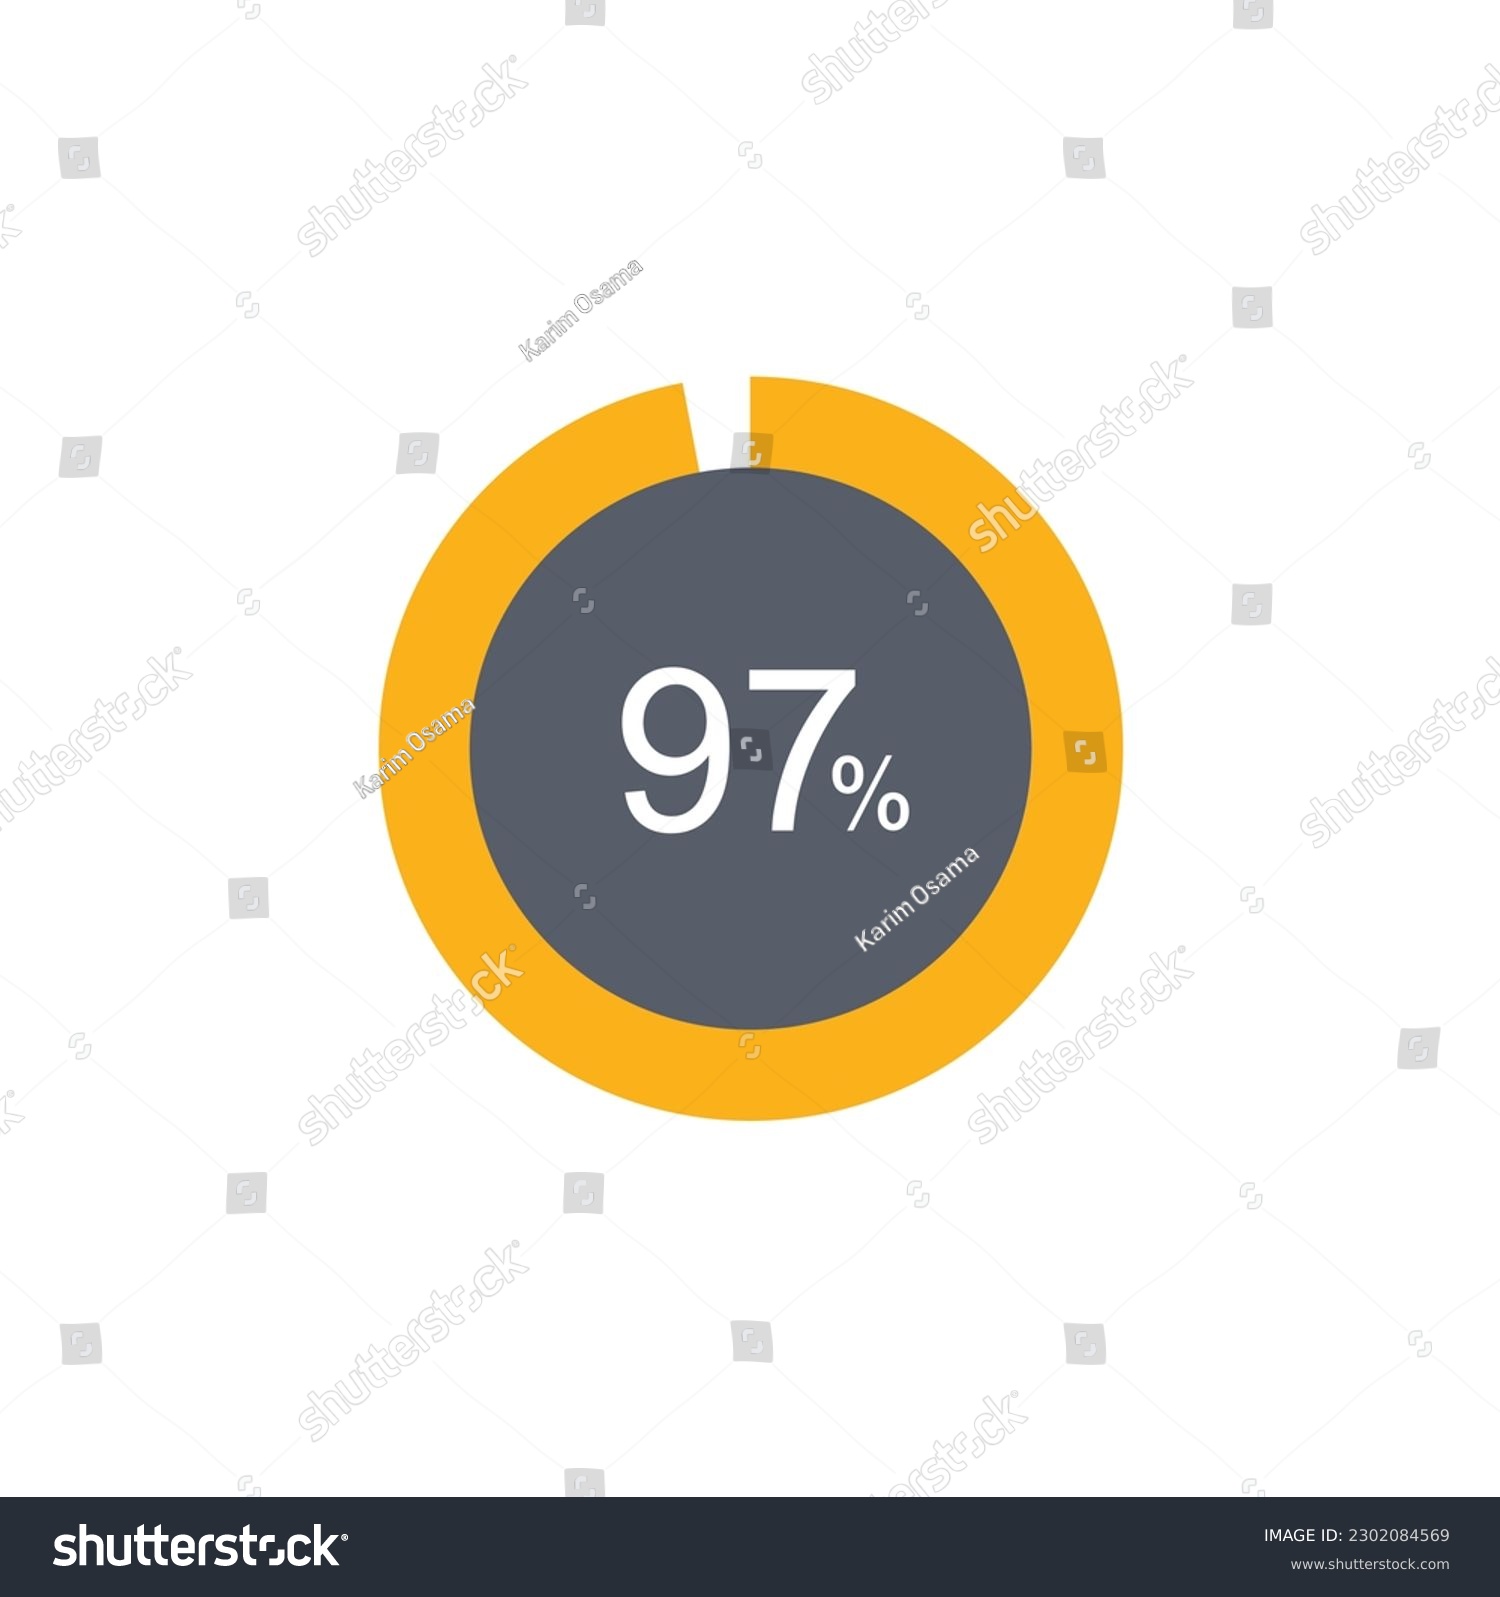 SVG of 97% percentage infographic circle icons,97 percents pie chart infographic elements for Illustration, business, web design. svg